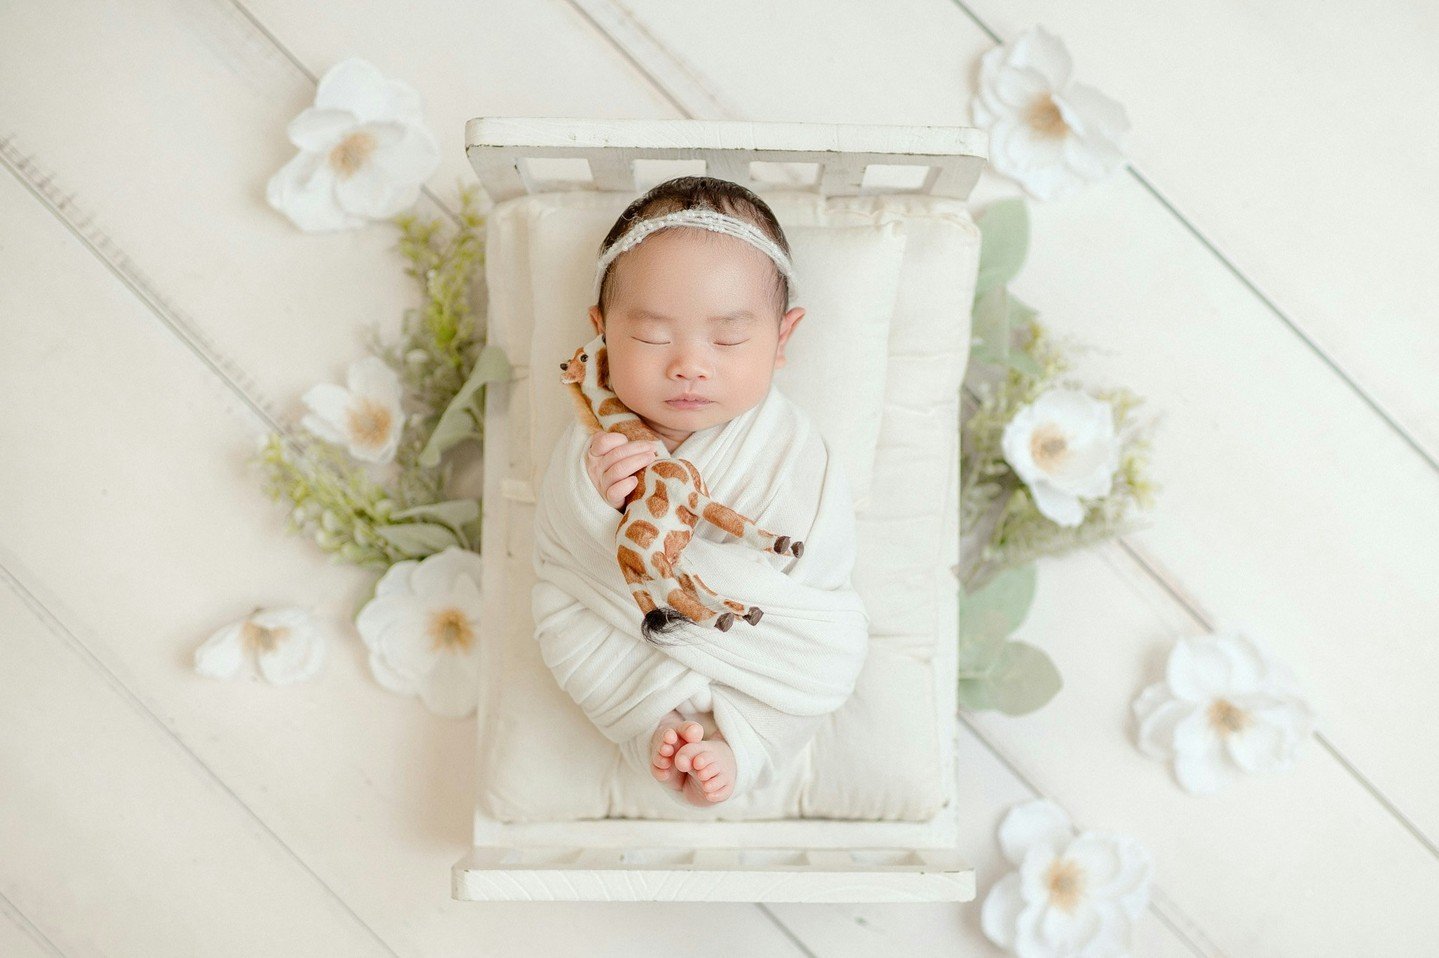 Mom said she loves giraffes and we just had to bust out this lovey! How cute!!

*Book your newborn session 1-2 months in advance to ensure availability.
*We use your due date to hold your spot, once baby arrives we&rsquo;ll get you scheduled!
*Only 8